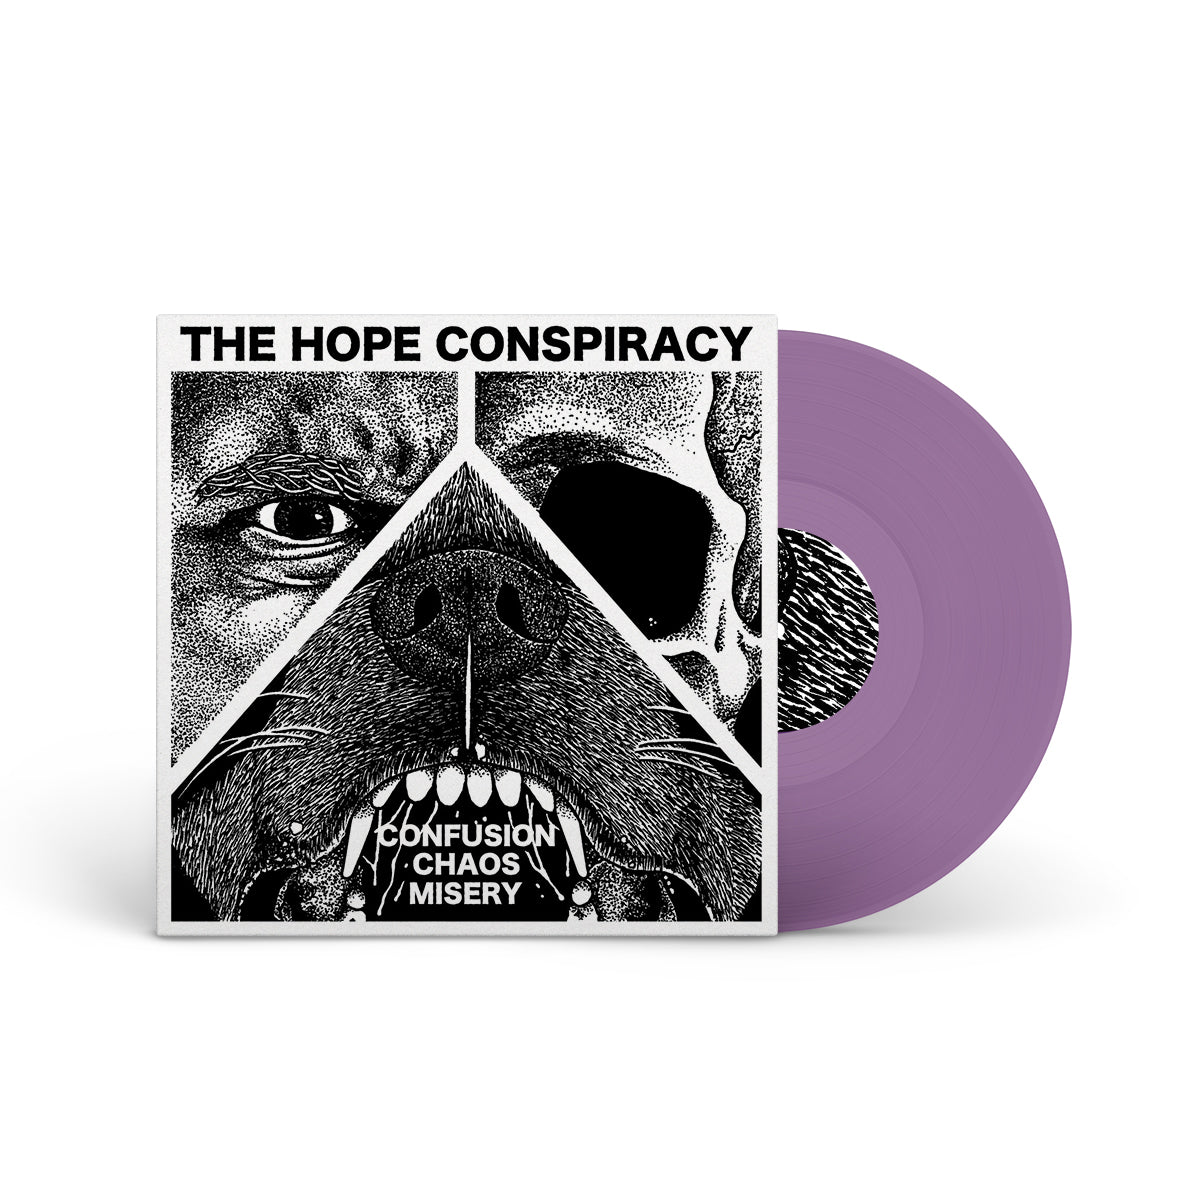 THE HOPE CONSPIRACY "Confusion/Chaos/Misery" 12"